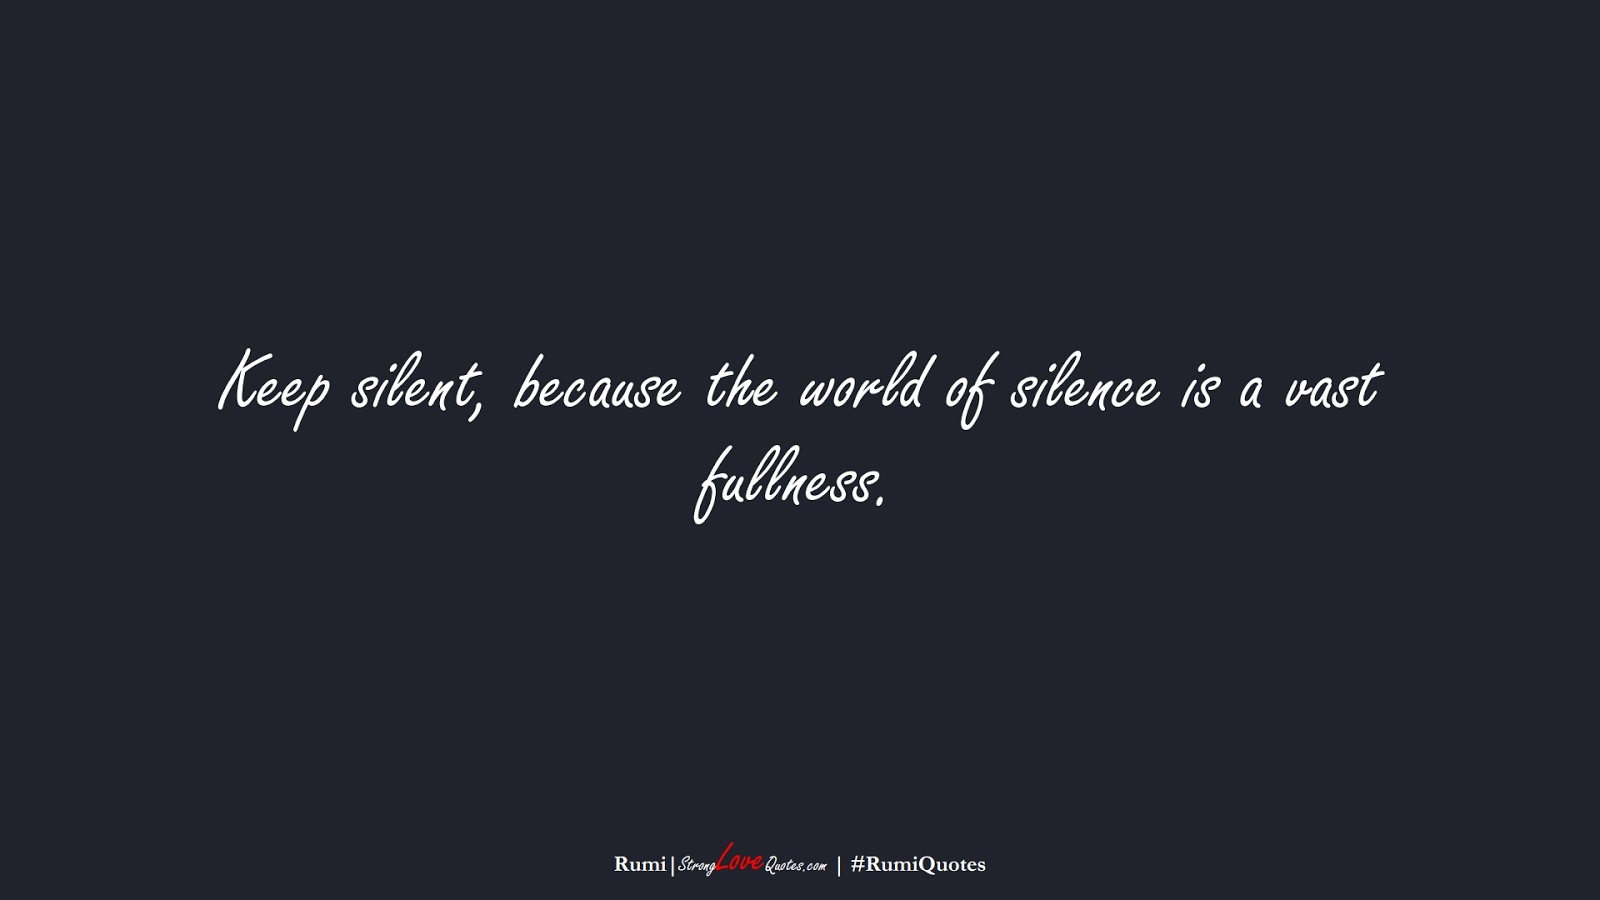 Keep silent, because the world of silence is a vast fullness. (Rumi);  #RumiQuotes